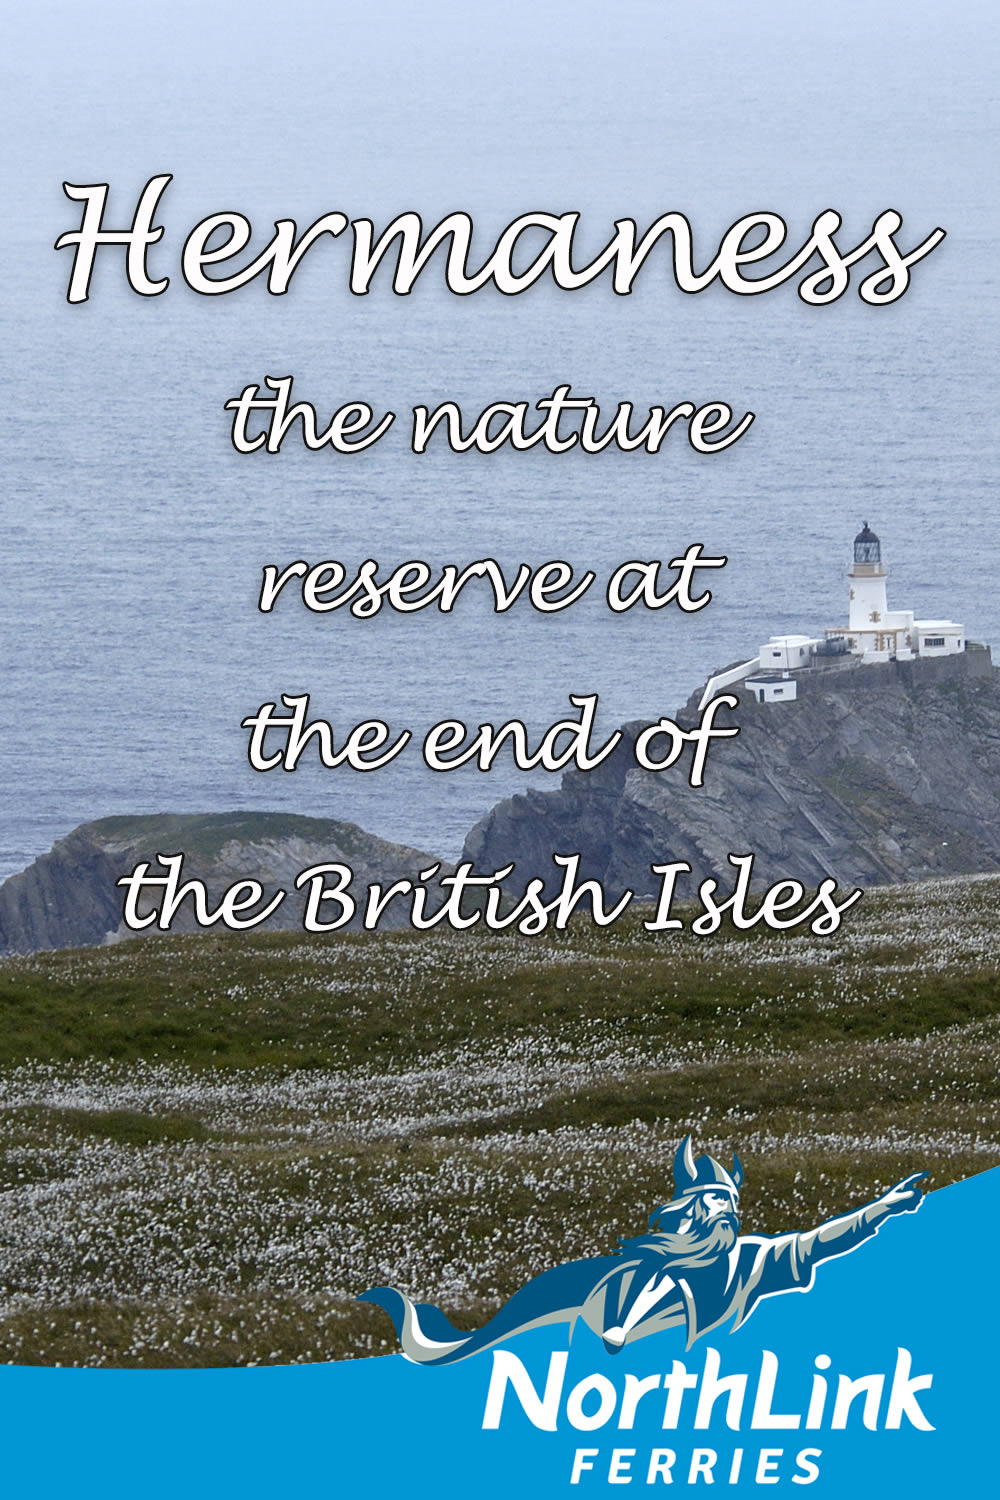 Hermaness – the nature reserve at the end of the British Isles